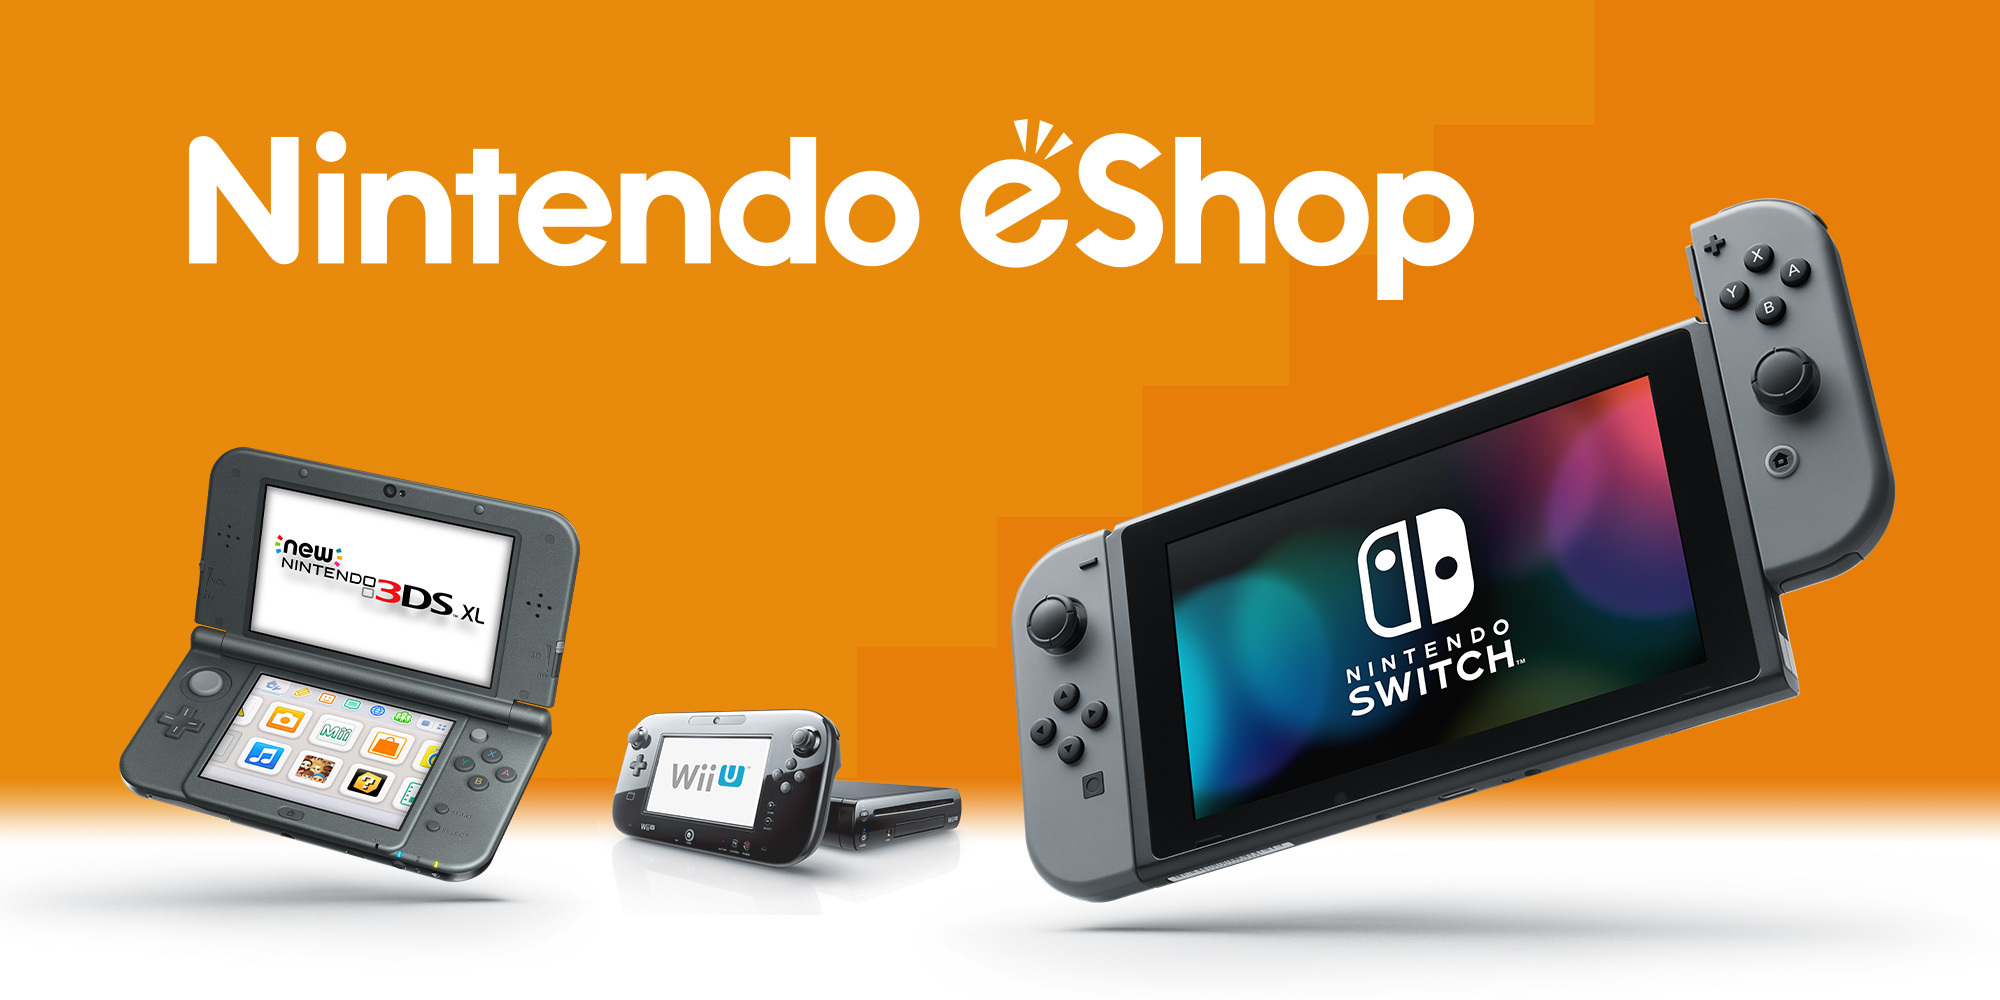 End of an era: Wii U and 3DS eShops closing today